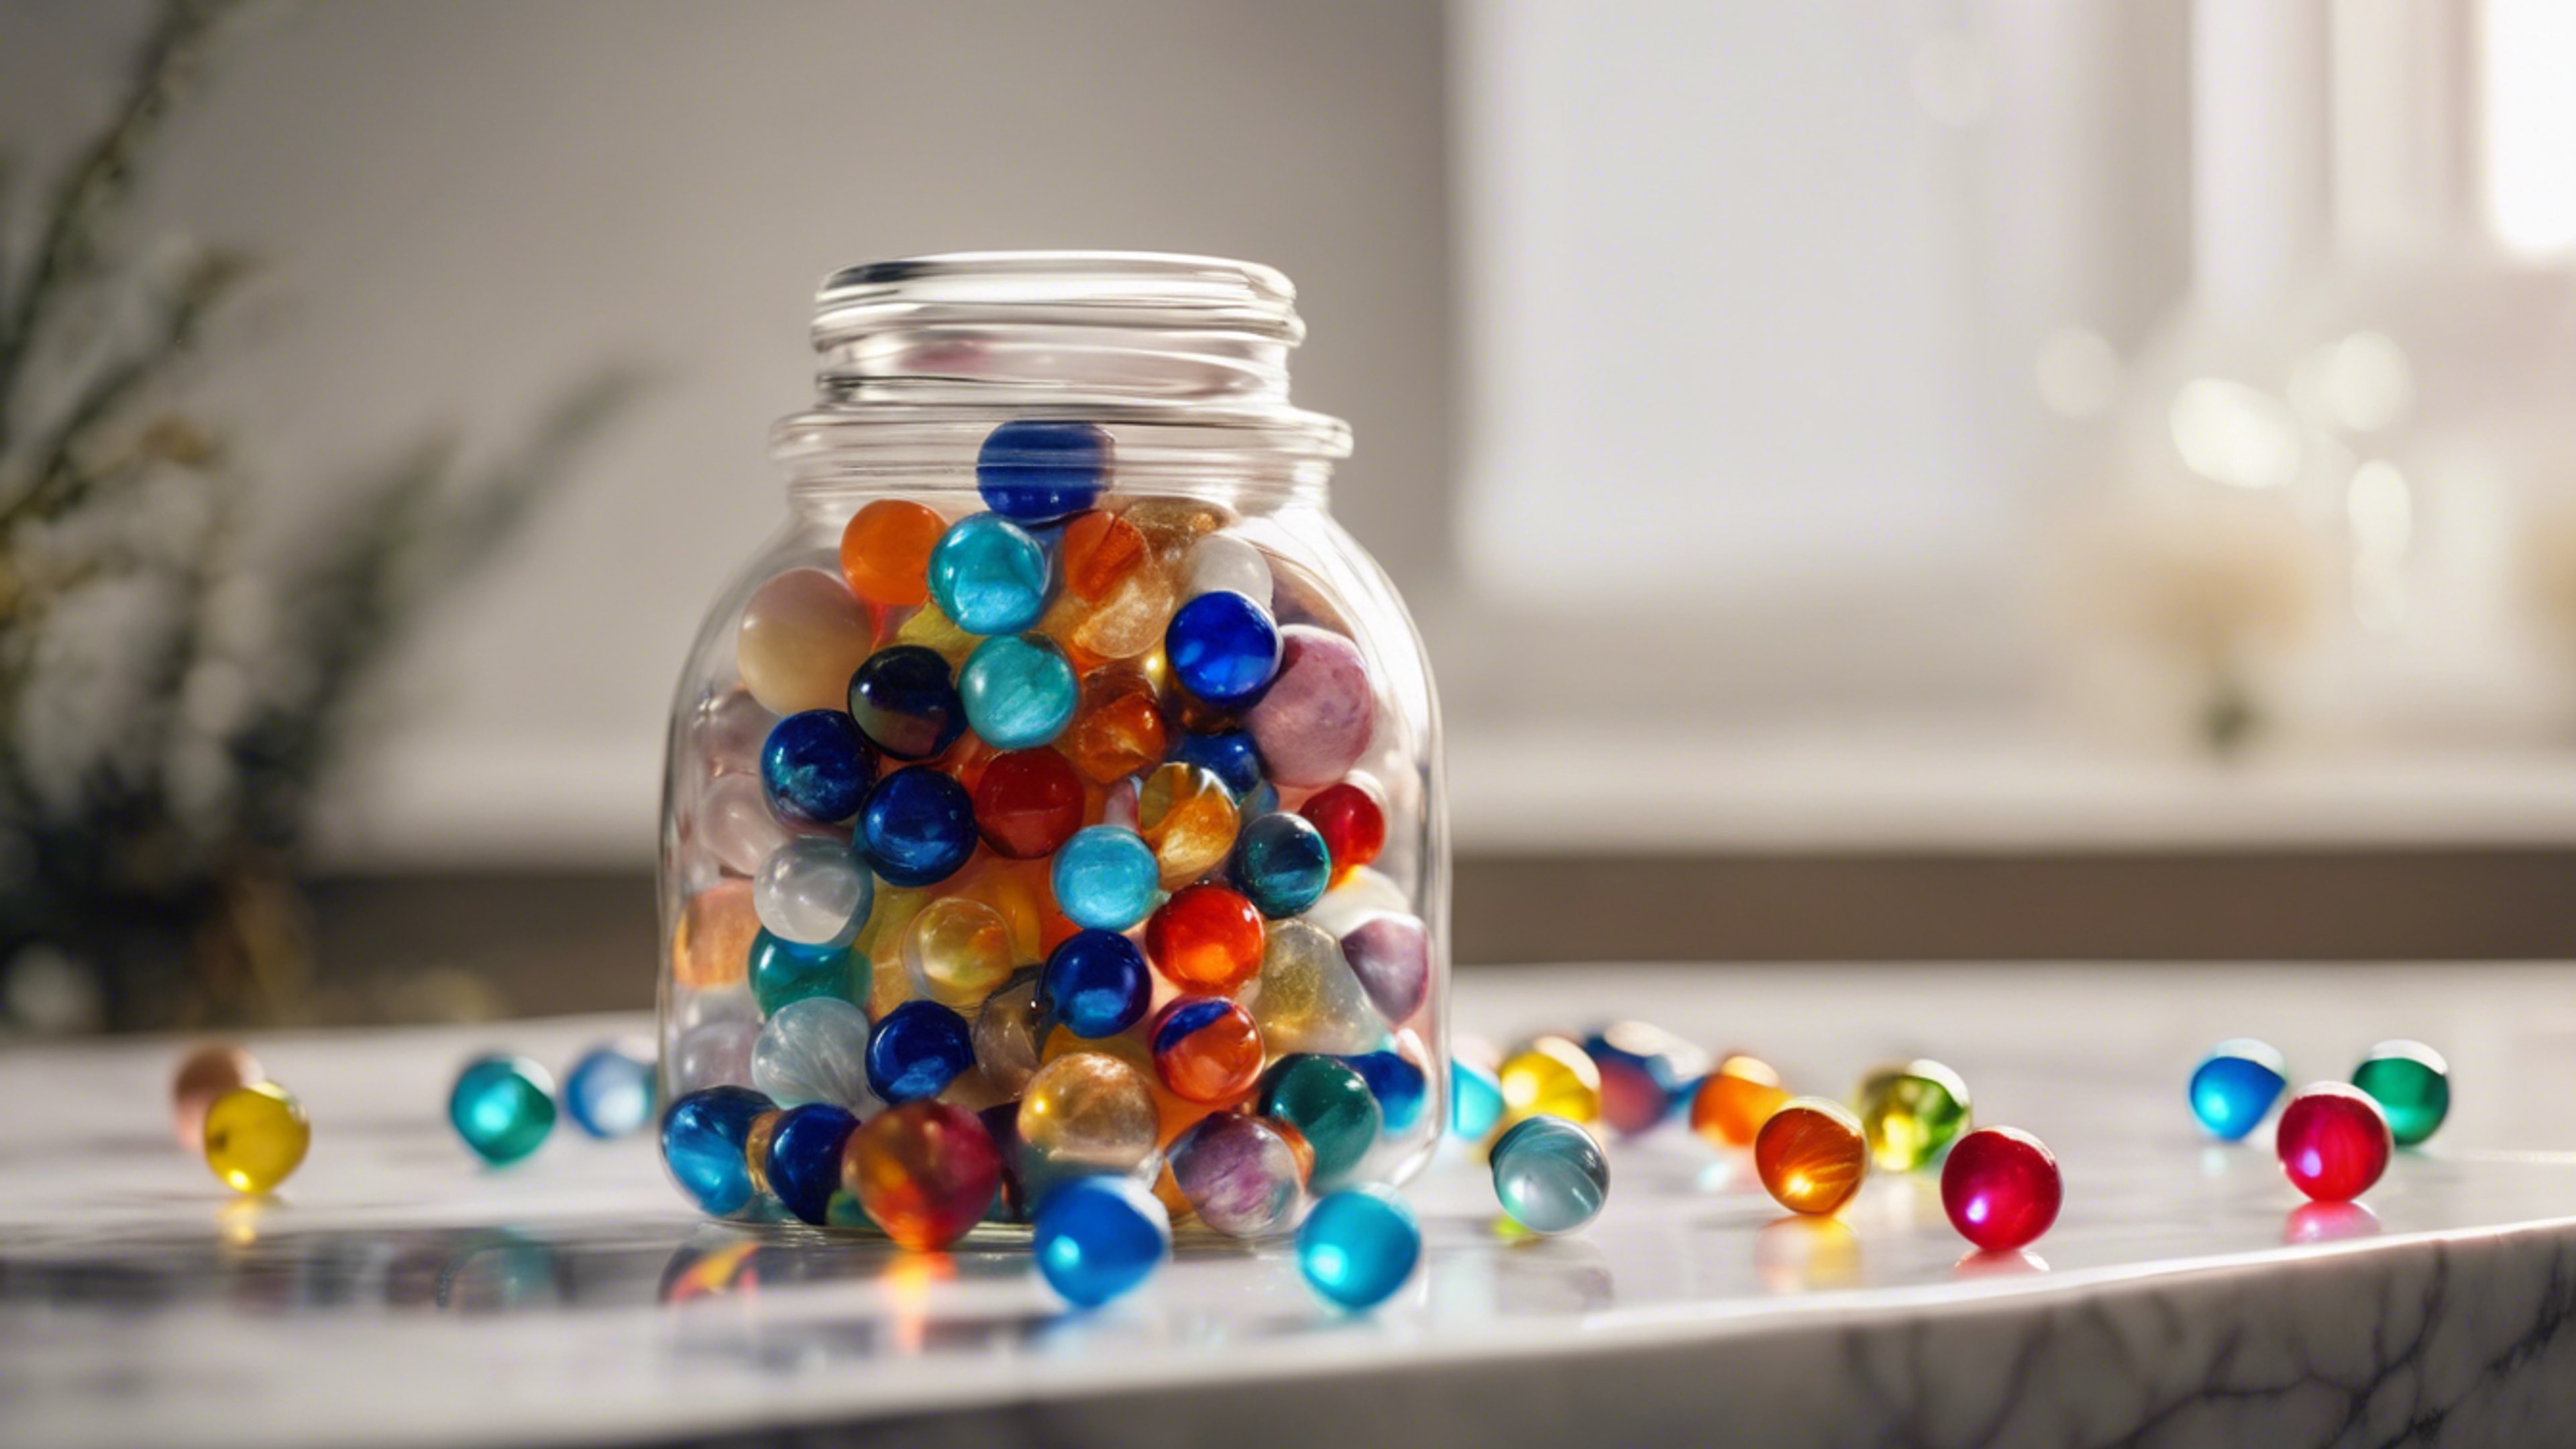 A glass jar full of colorful marbles with glinting lights around them, placed on a white marble surface. کاغذ دیواری[9438bf9259b84d3ca042]